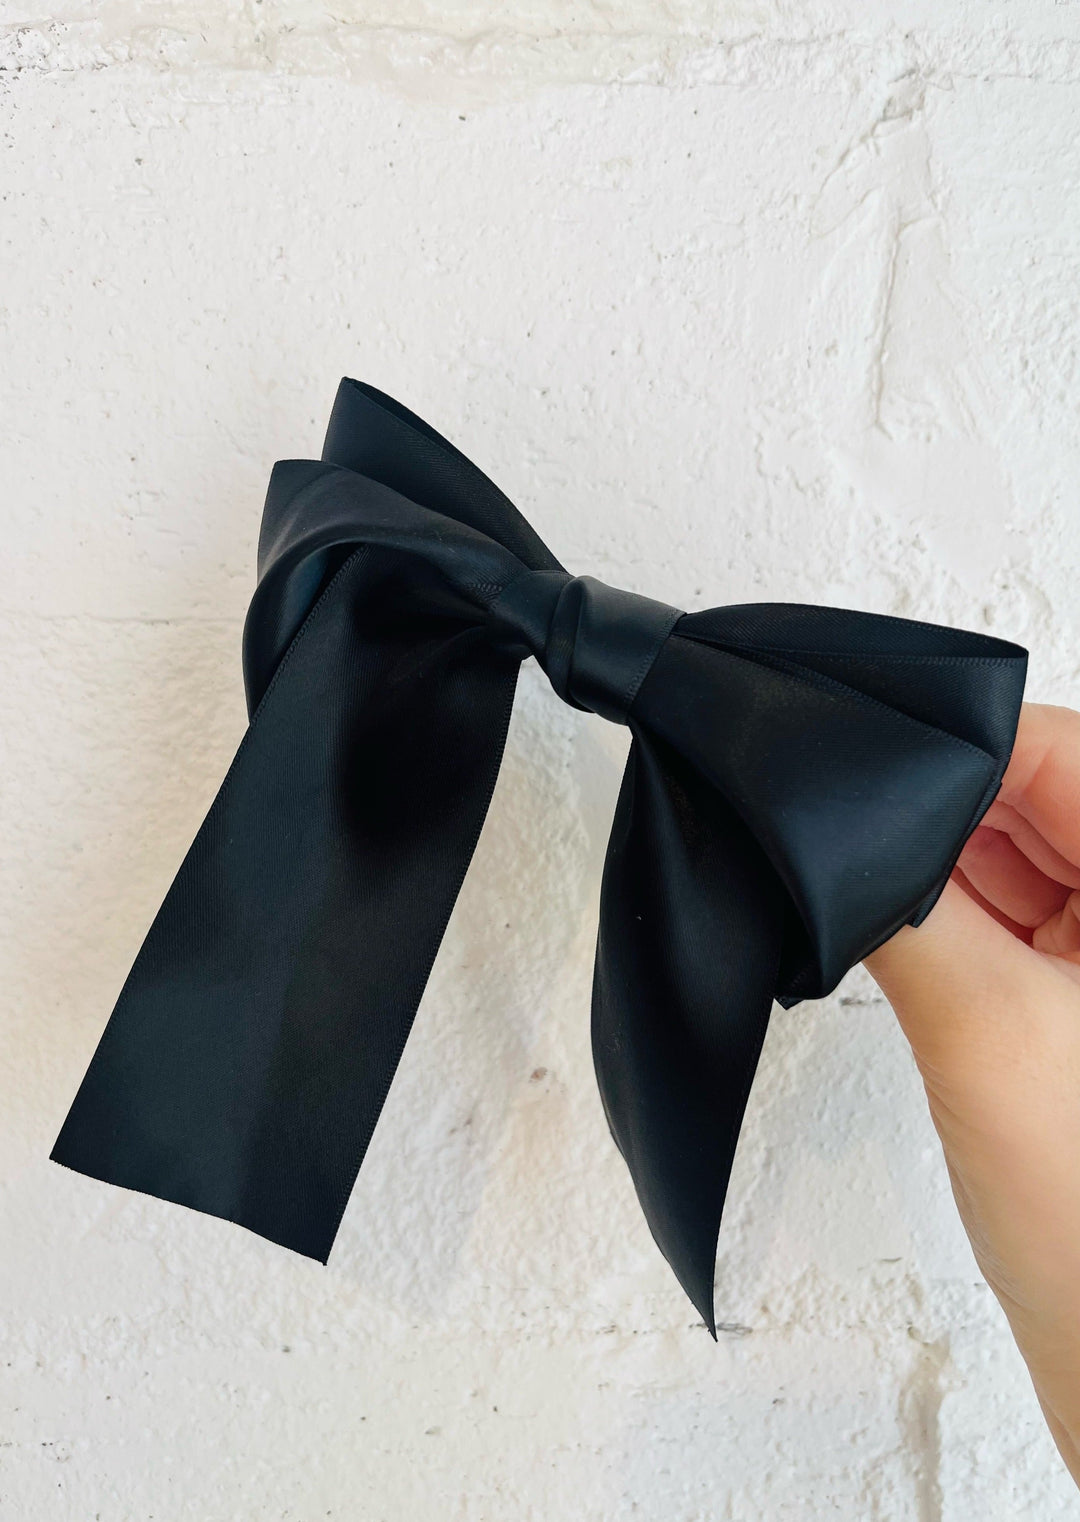 Big Satin Hair Bow, Hair Ties, Adeline, Adeline, dallas boutique, dallas texas, texas boutique, women's boutique dallas, adeline boutique, dallas boutique, trendy boutique, affordable boutique